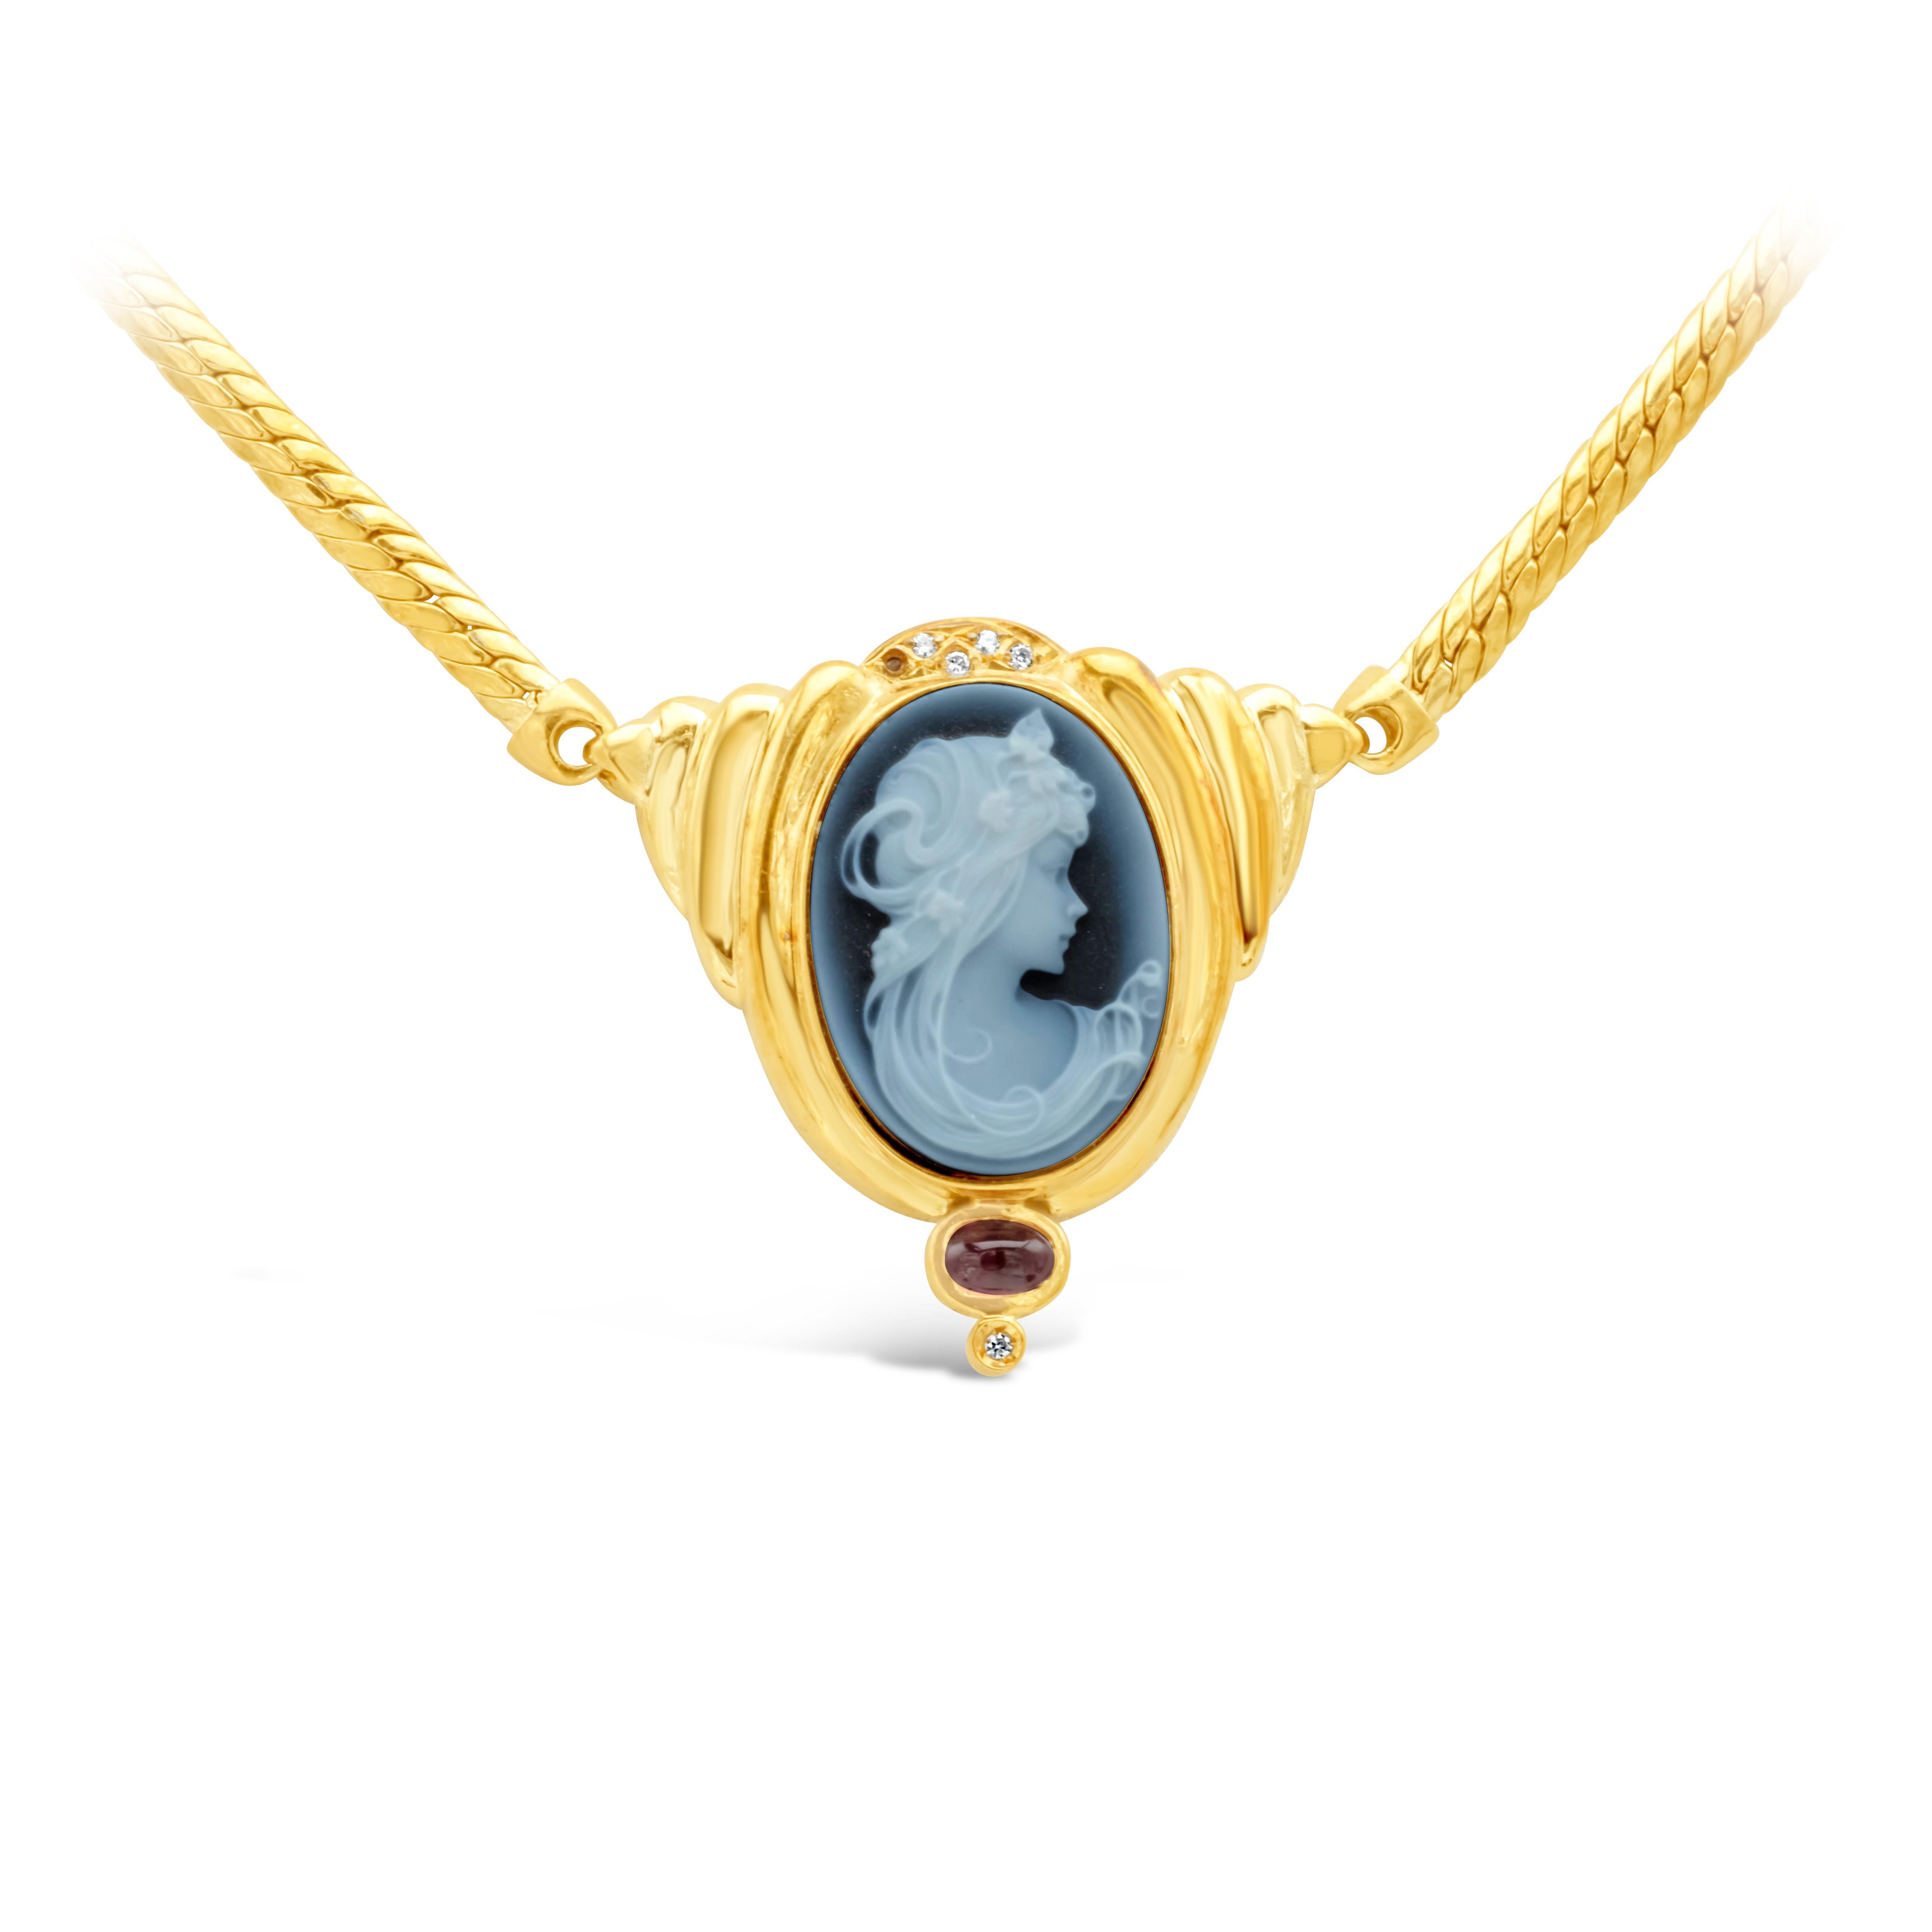 Showcasing a beautiful victorian blue cameo Carving of a woman. Accented with pink sapphire and diamonds. Suspended on a 18k yellow gold chain and perfectly made in 18k yellow gold.